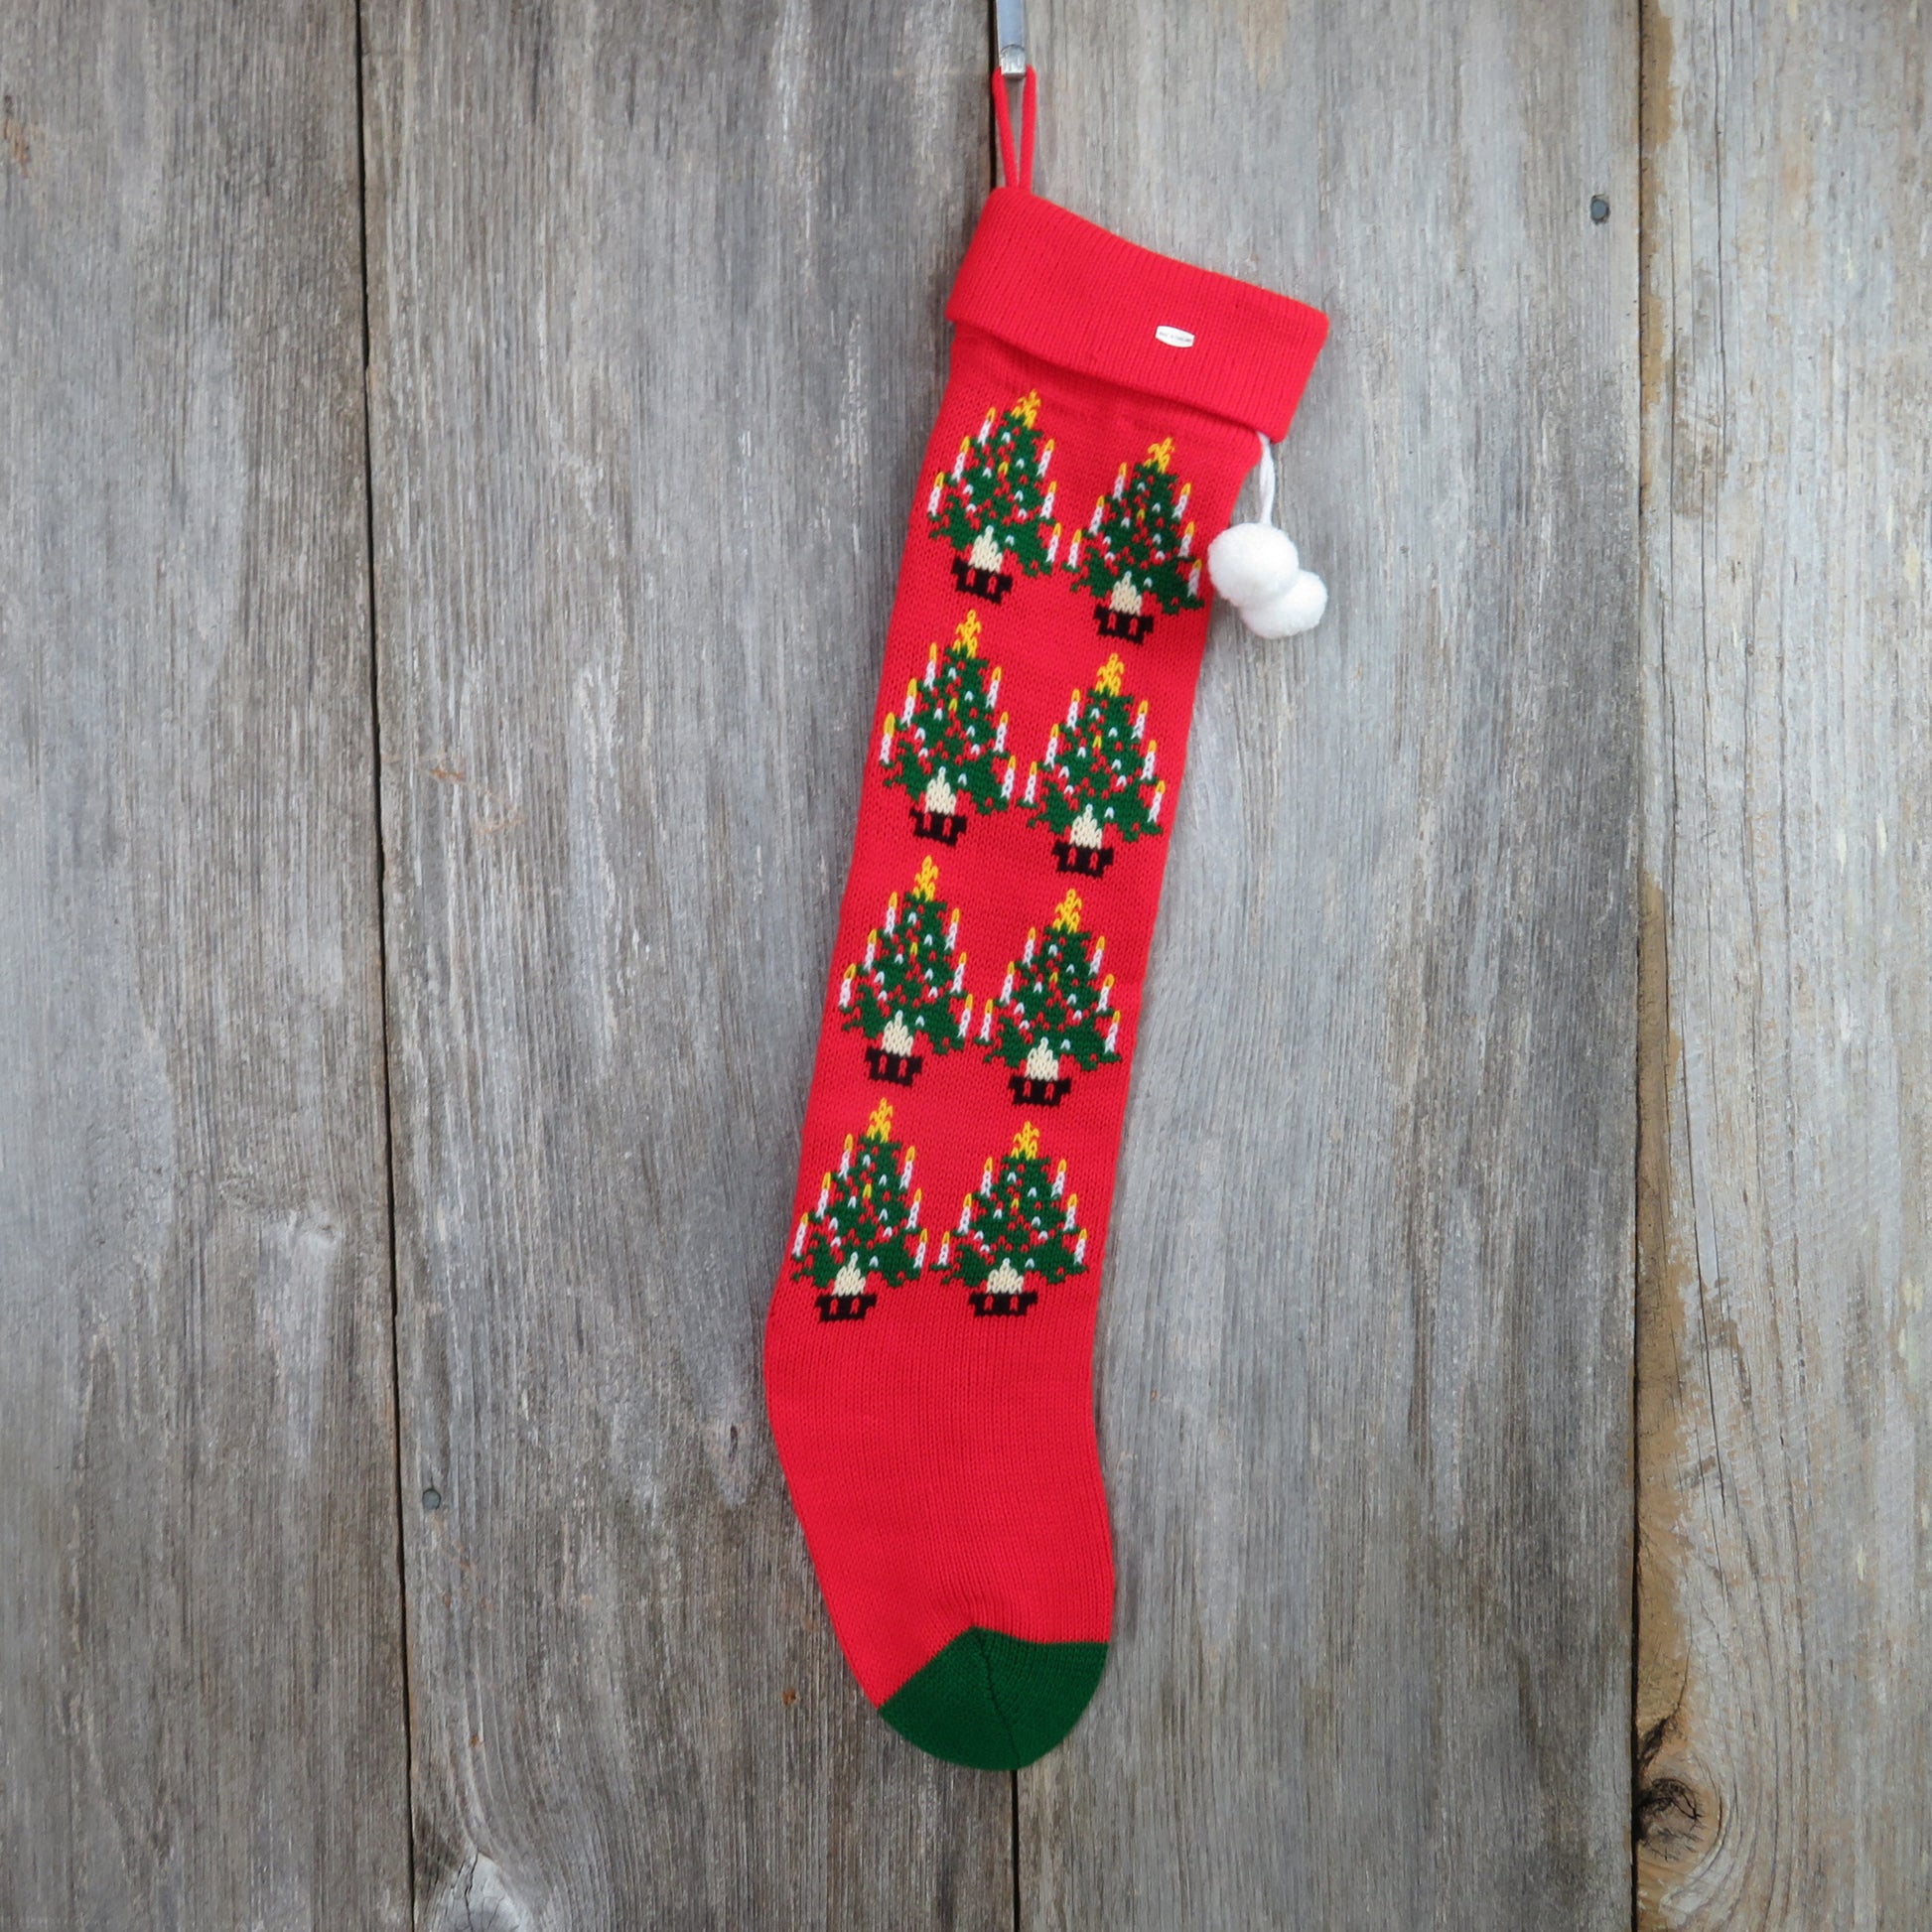 Vintage Christmas Tree Knit Stocking Red Green Pom Pom Candle Thailand - At Grandma's Table